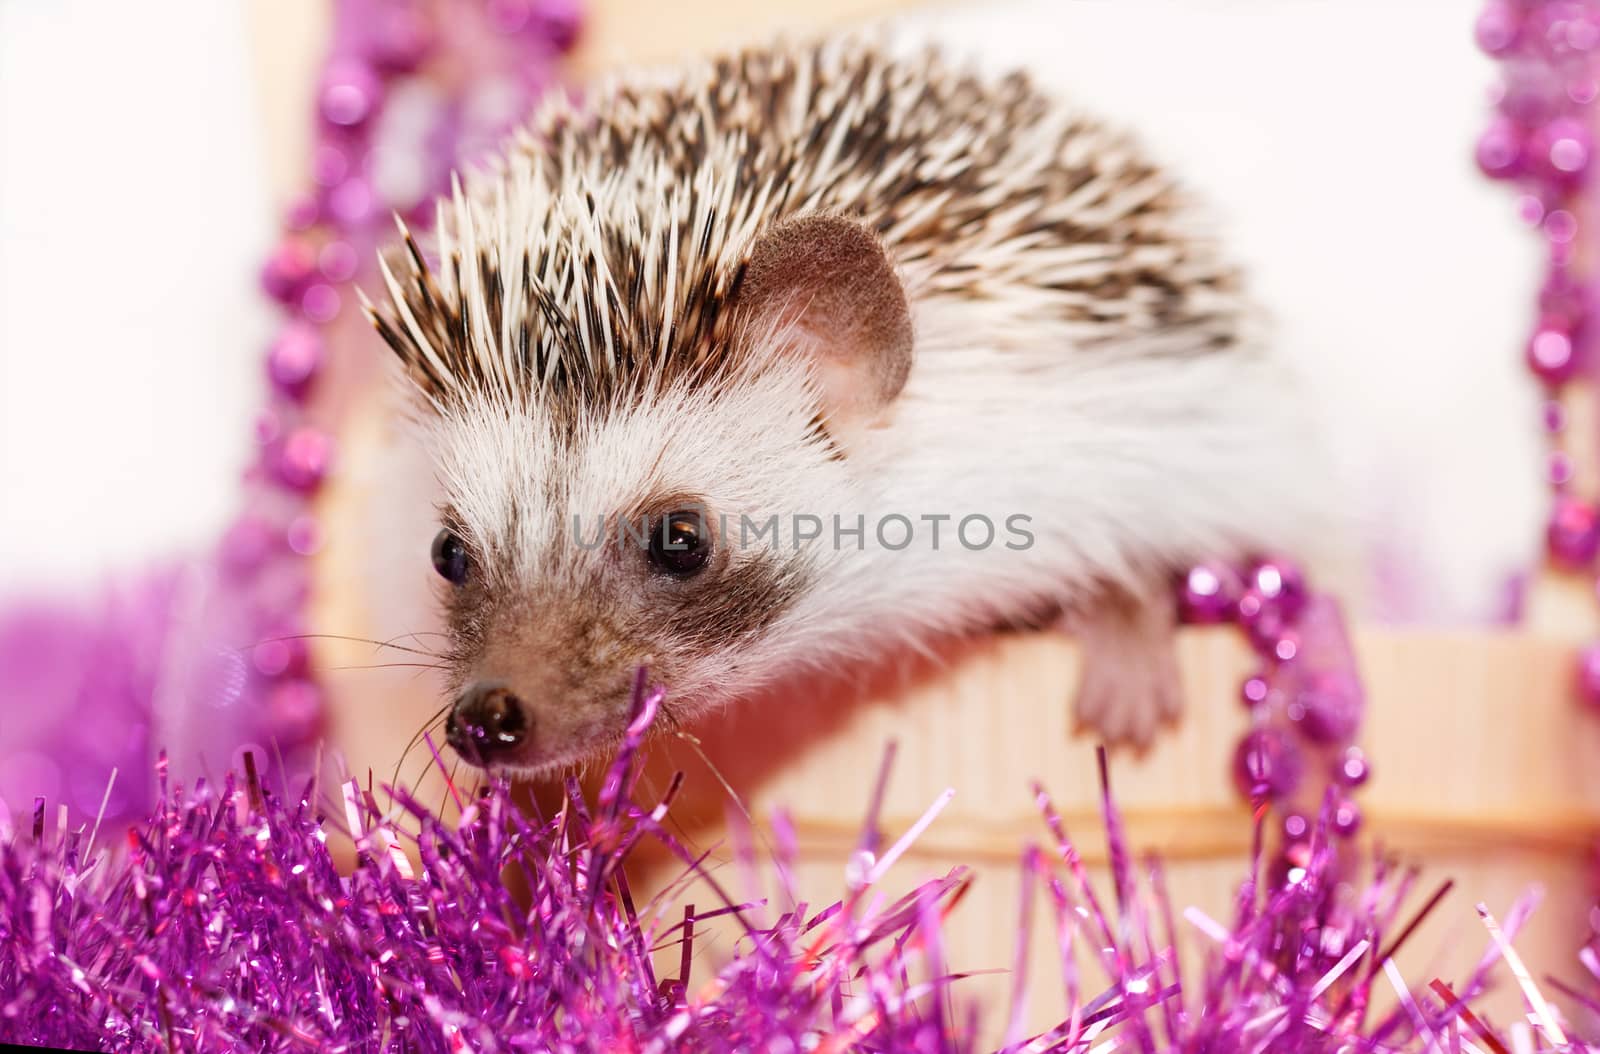 A cute little hedgehog with Christmas decorations